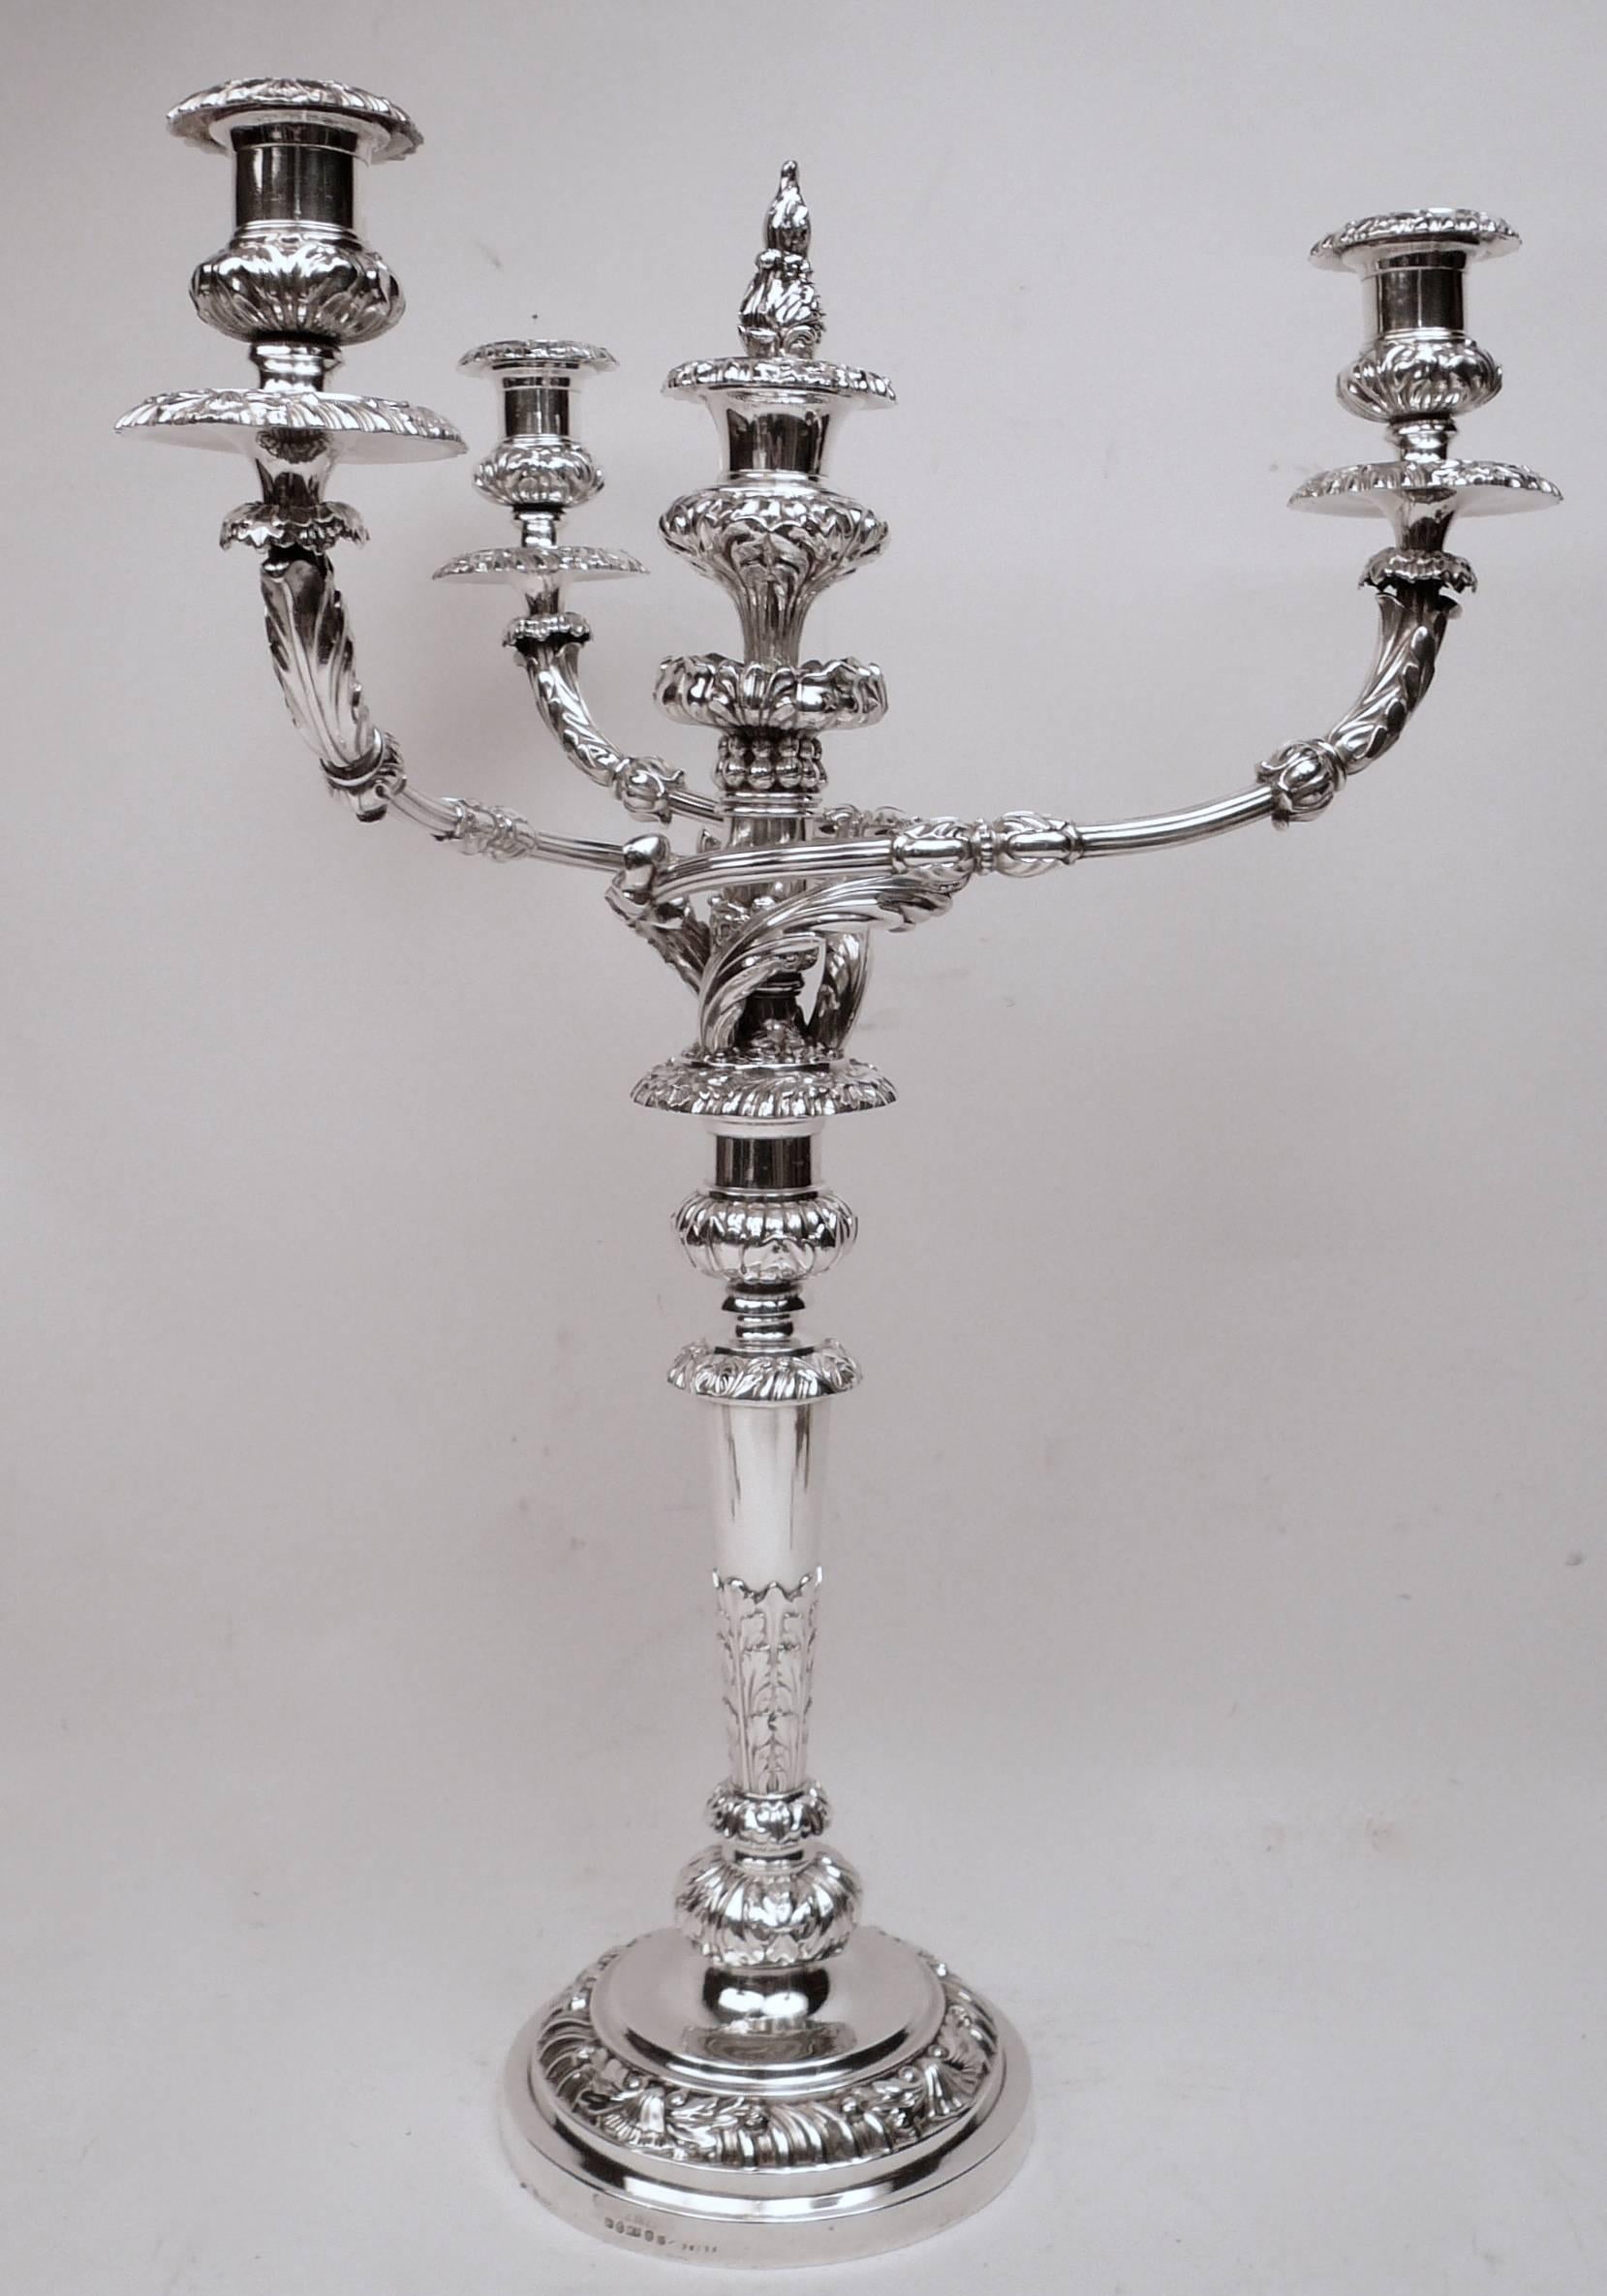 This impressive, fully hallmarked pair of sterling silver candelabra by the famous silversmith Matthew Boulton are of the finest quality. They were deaccessioned from the historic home of Charles Carroll Jr.
The house was a gift to Charles Jr. from